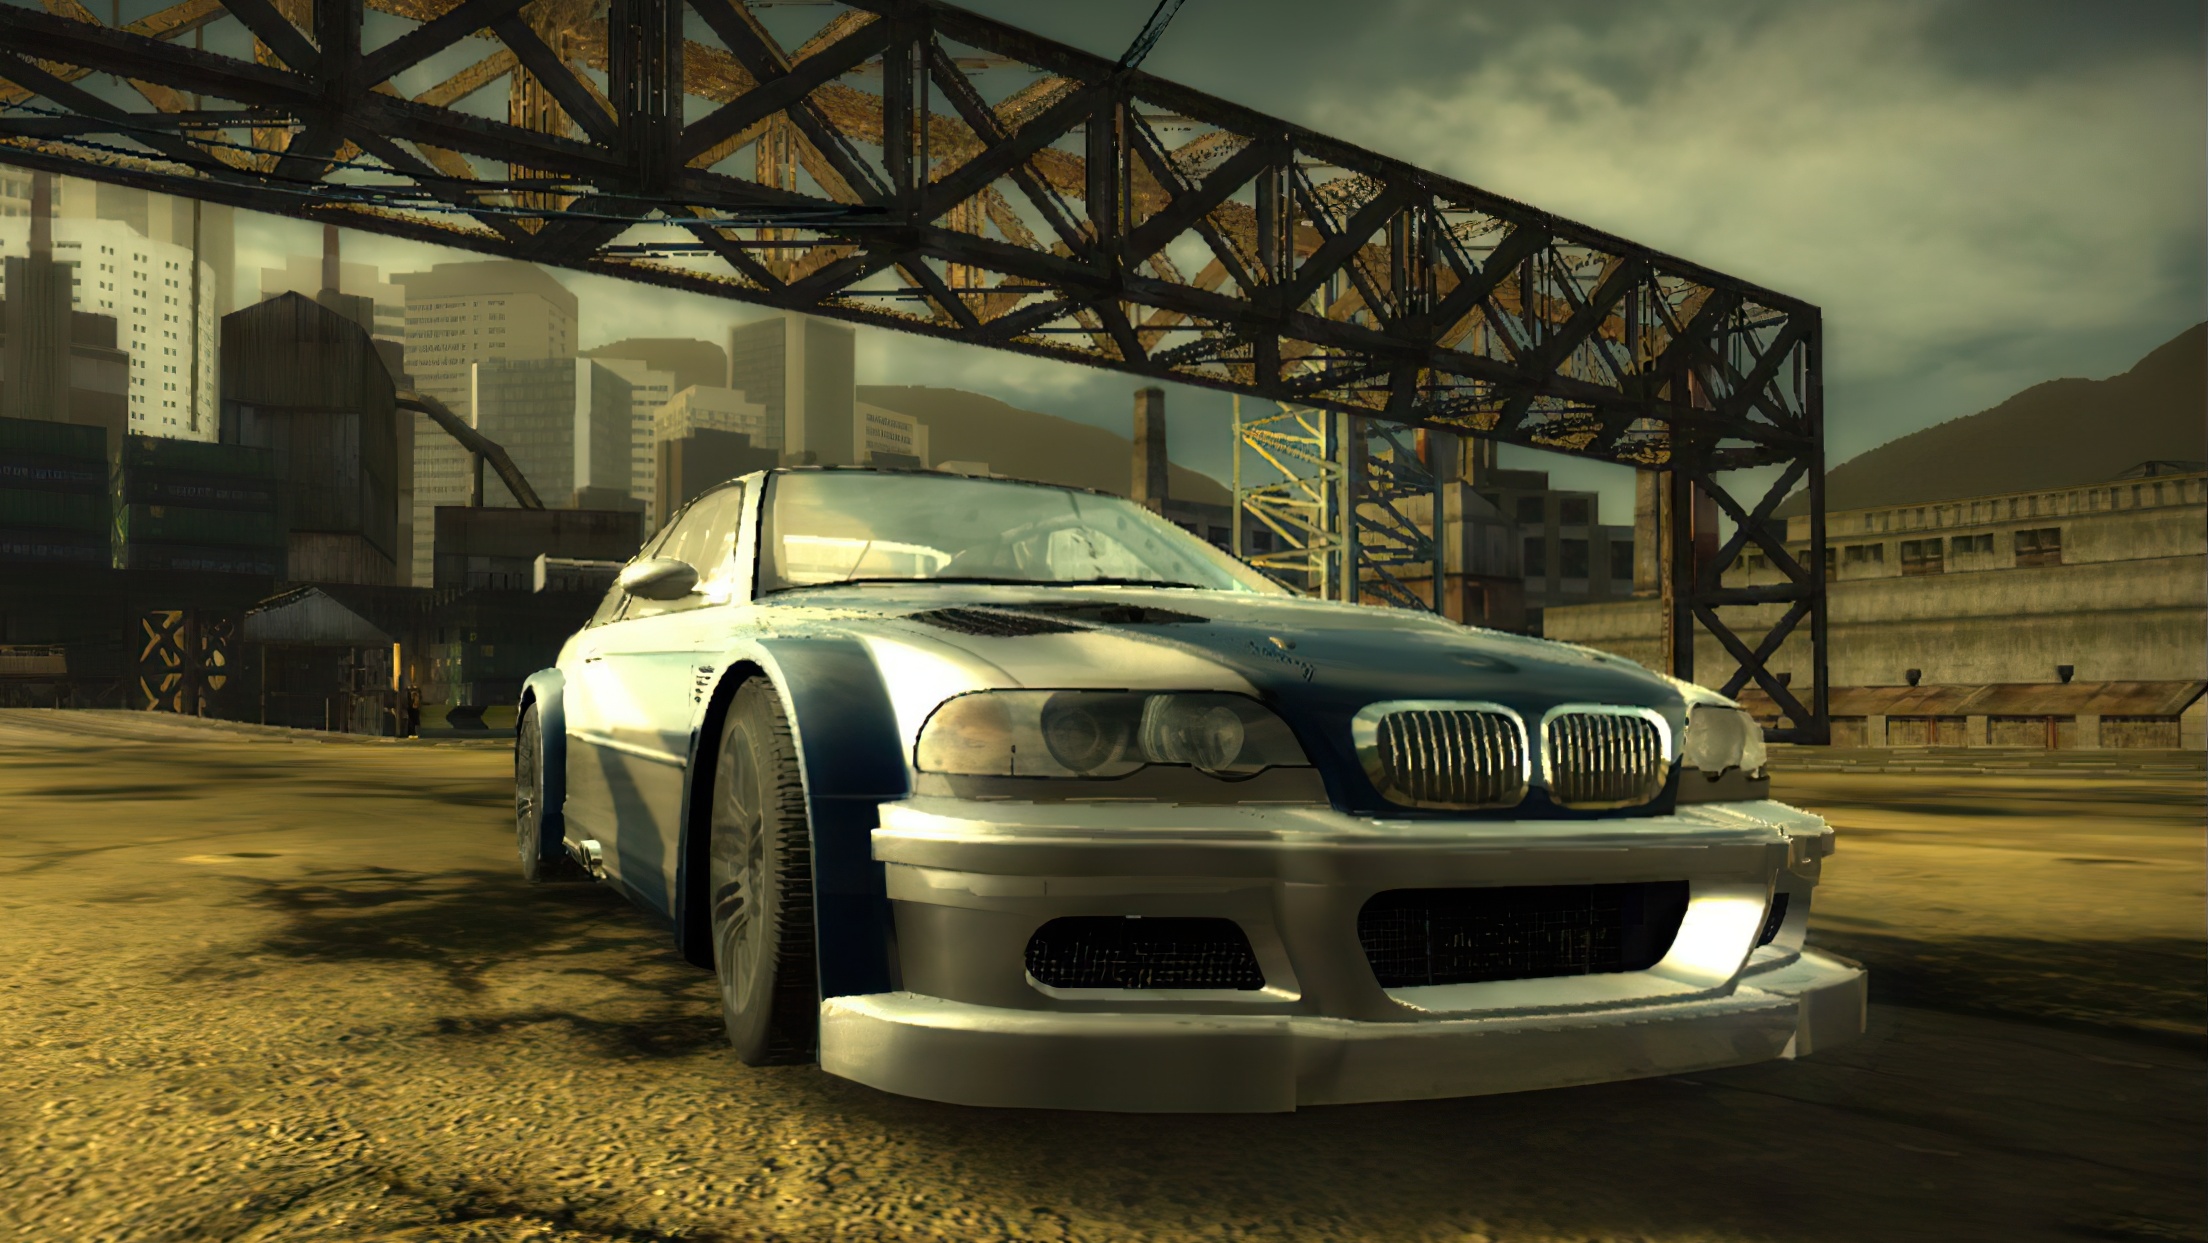 Nfs mw 2. BMW m3 GTR. Need for Speed most wanted 2005. Нид фор СПИД most wanted 2005. Нфс МВ 2005.